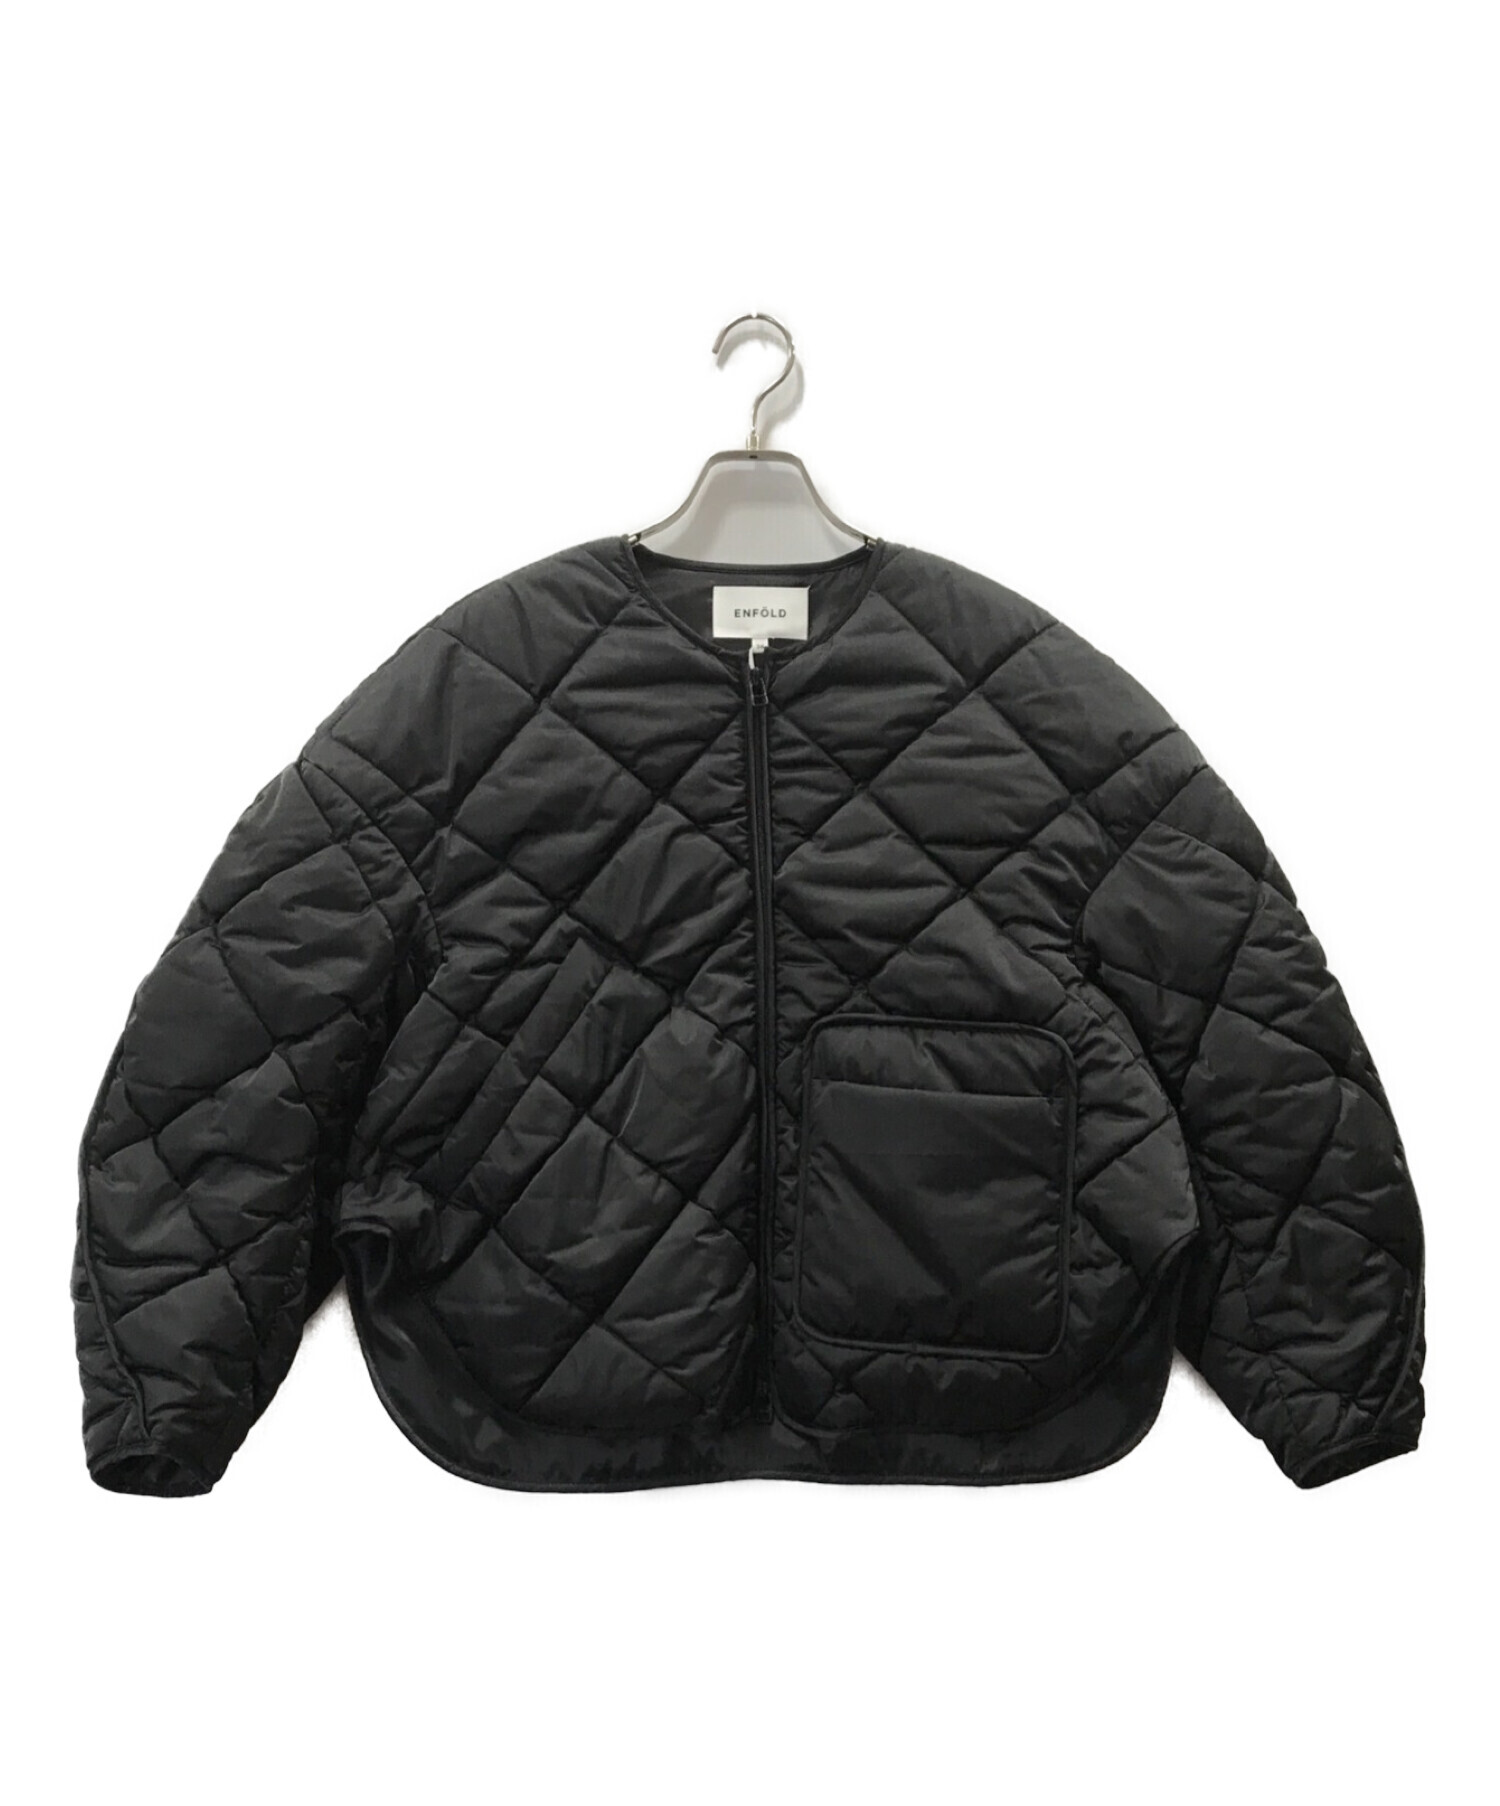 enfold SATIN QUILTED JACKETエンフォルド